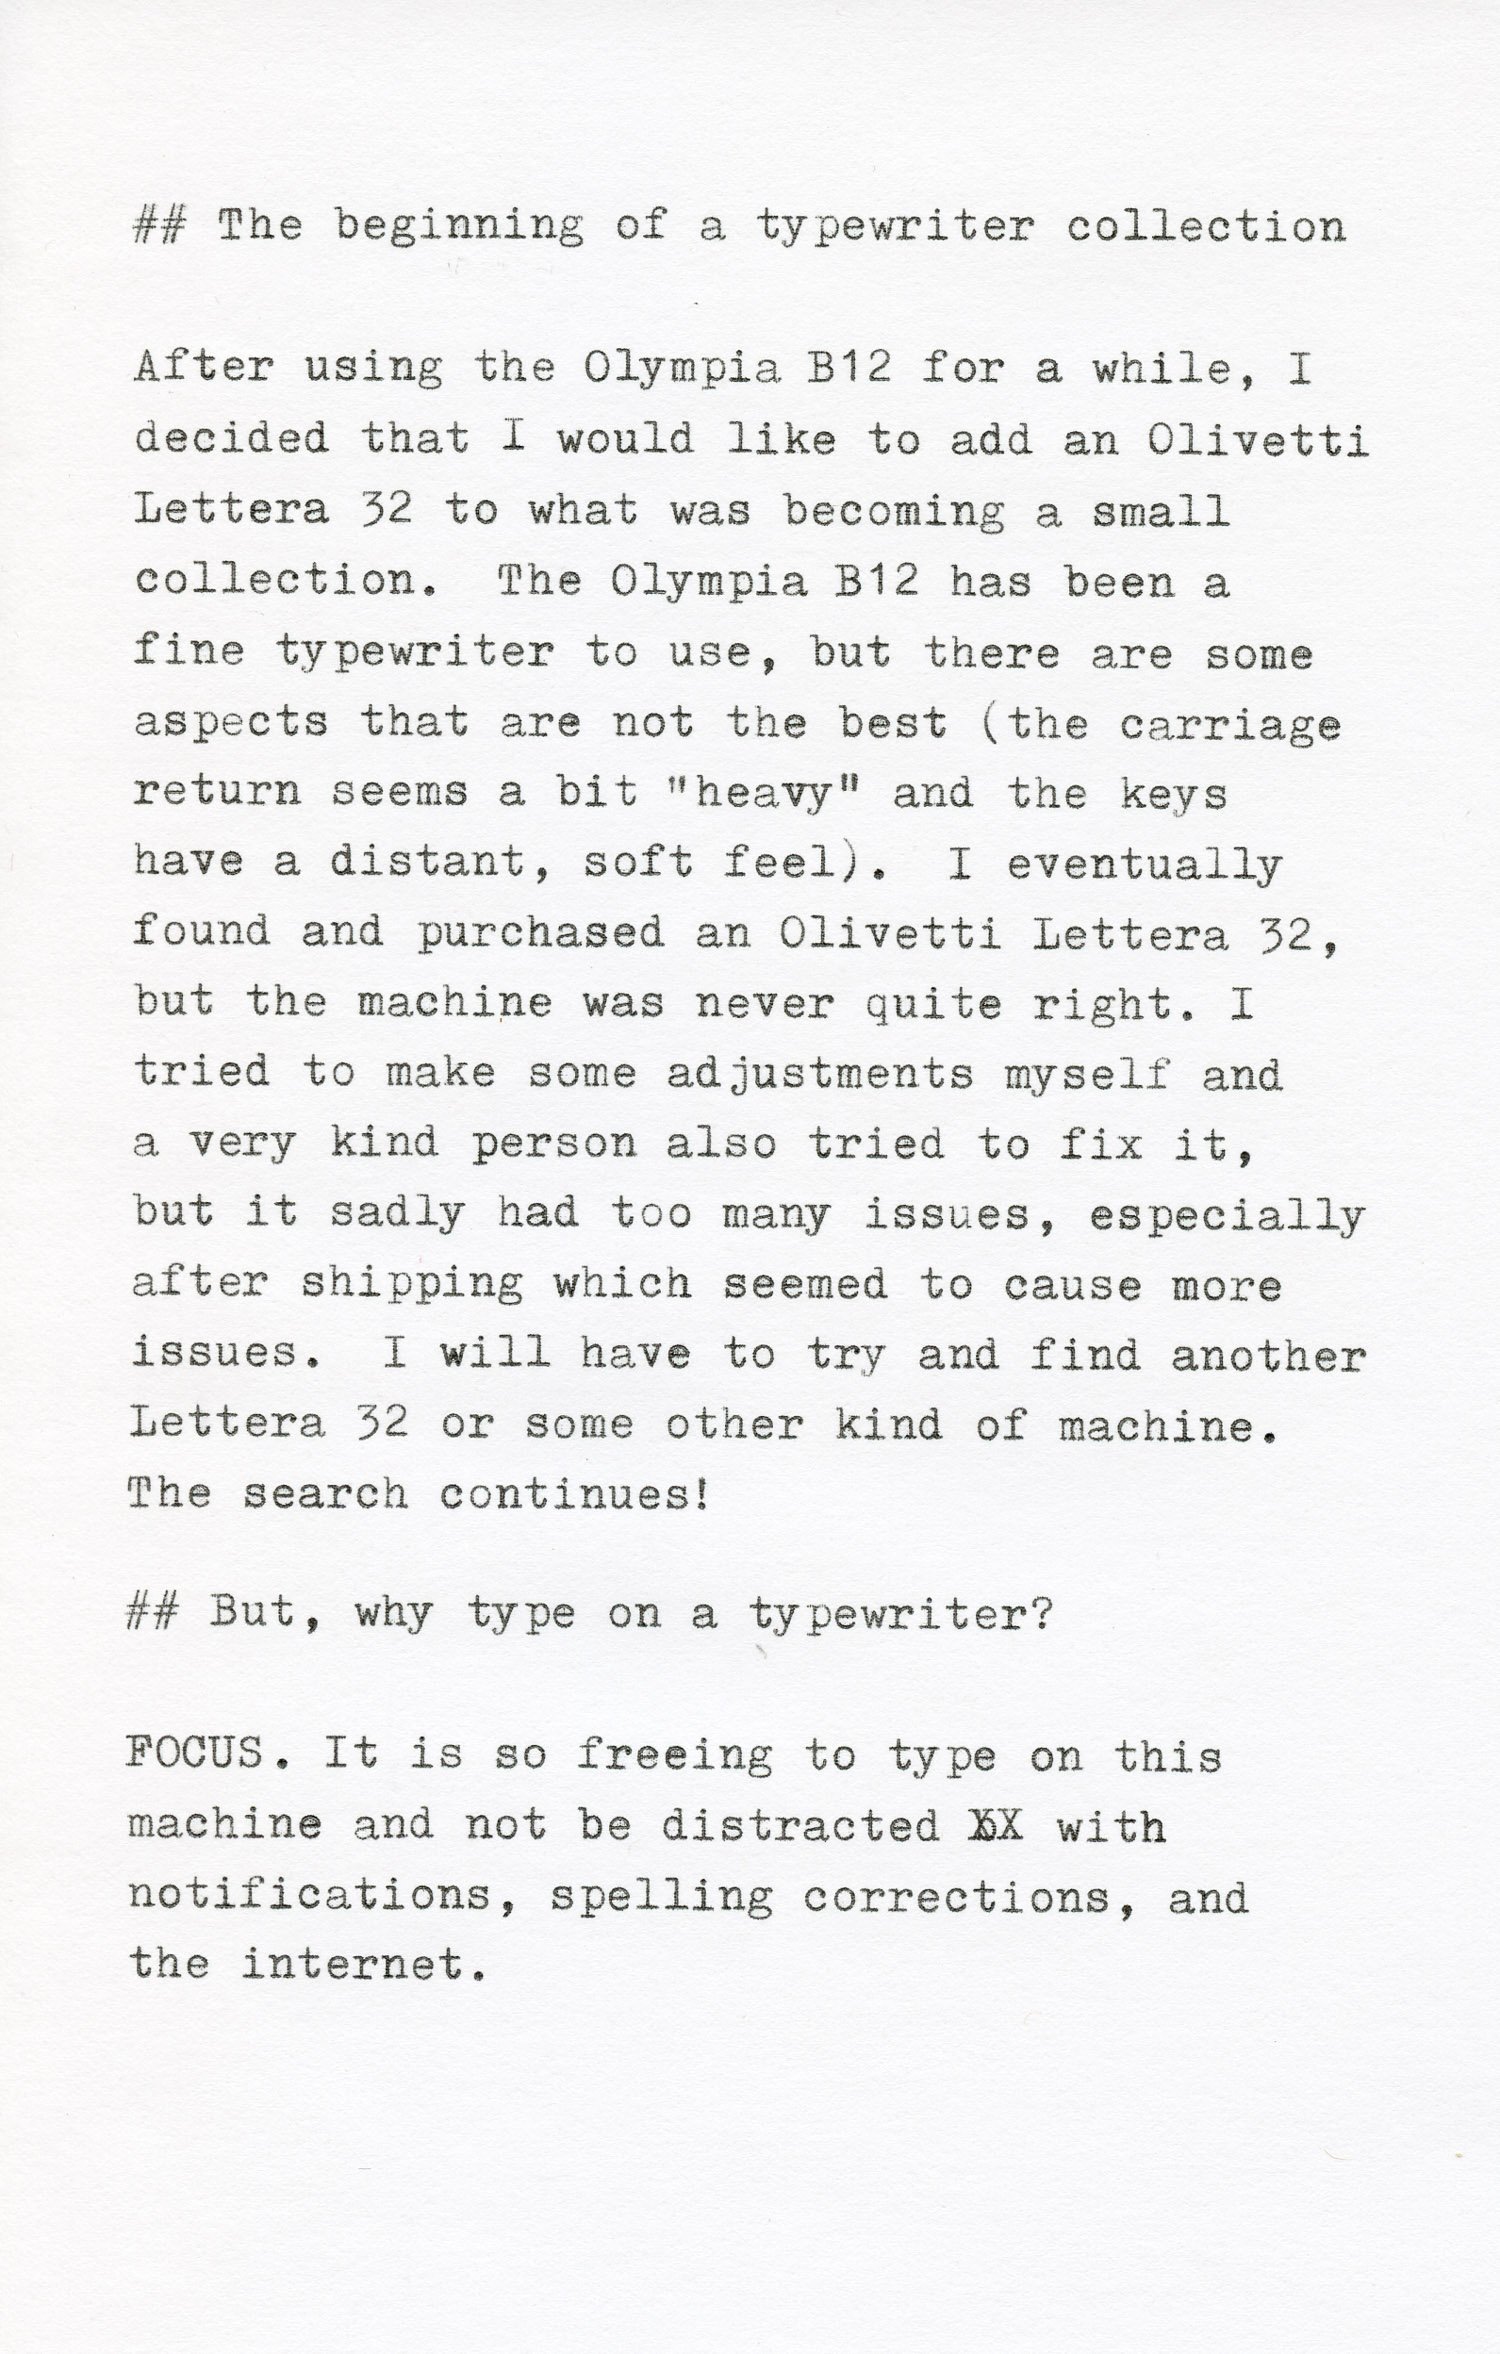 Scan of typed article, page 4